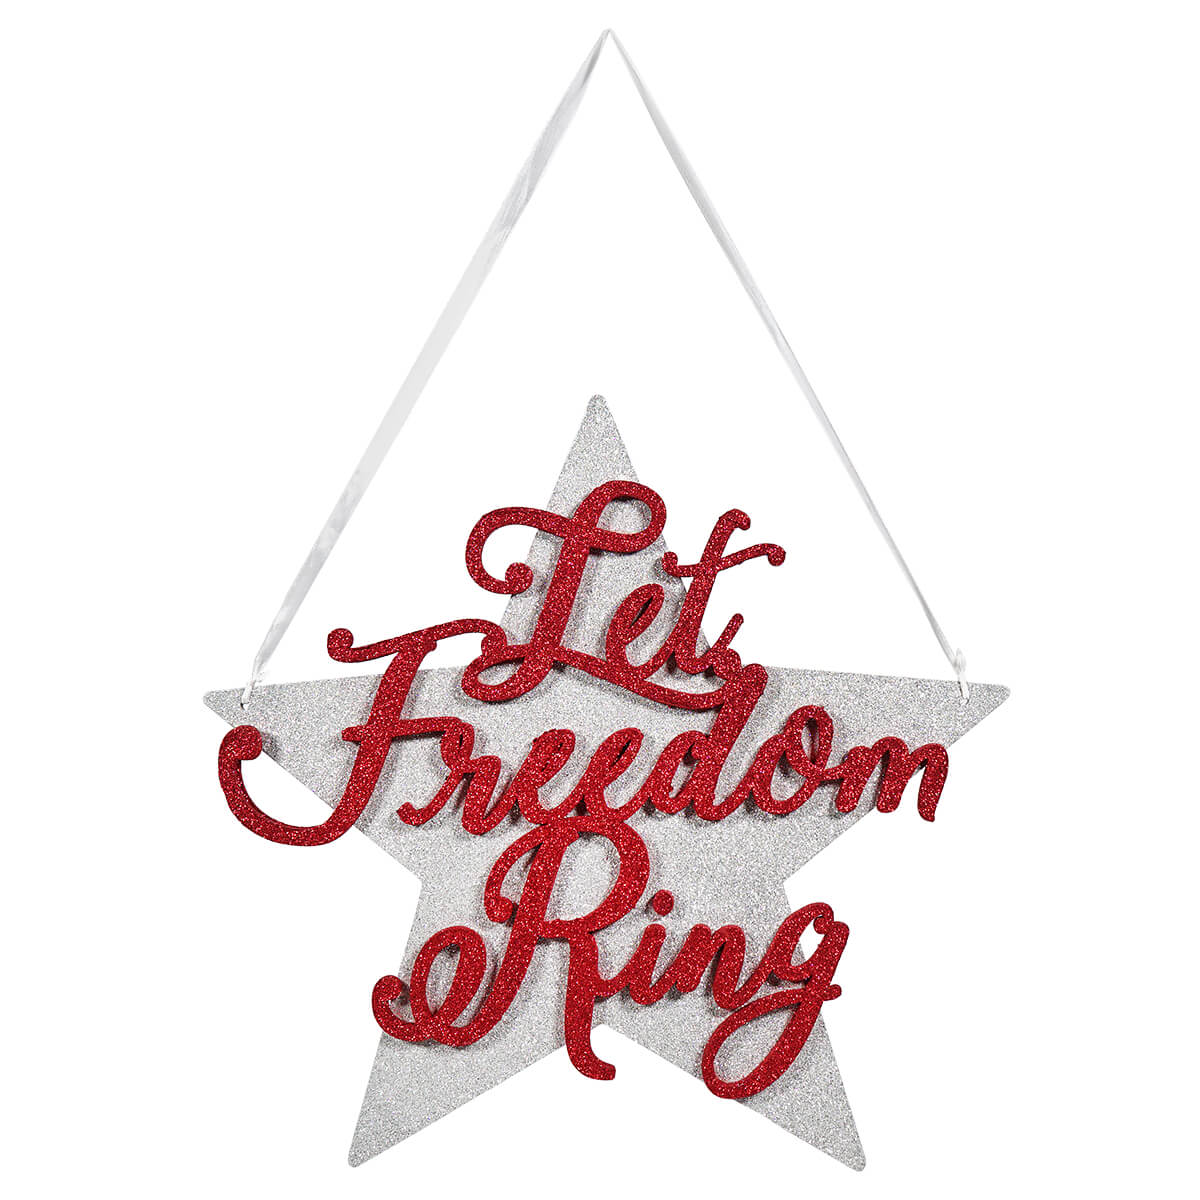 Let Freedom Ring Sign